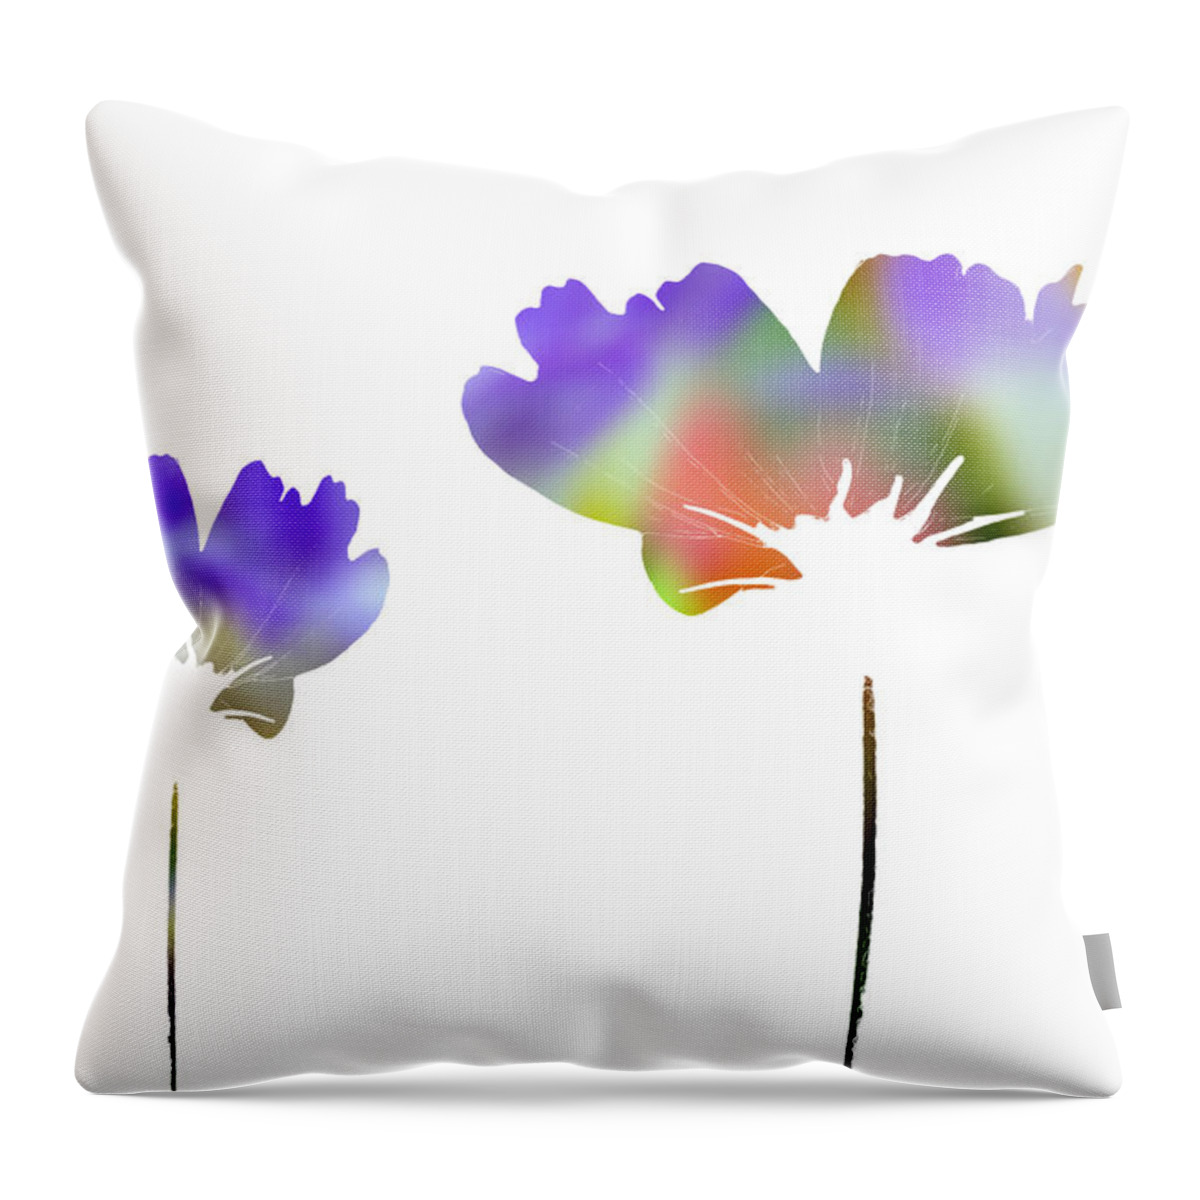 Silhouette Throw Pillow featuring the mixed media Three Feeling Freesia by Angelina Tamez